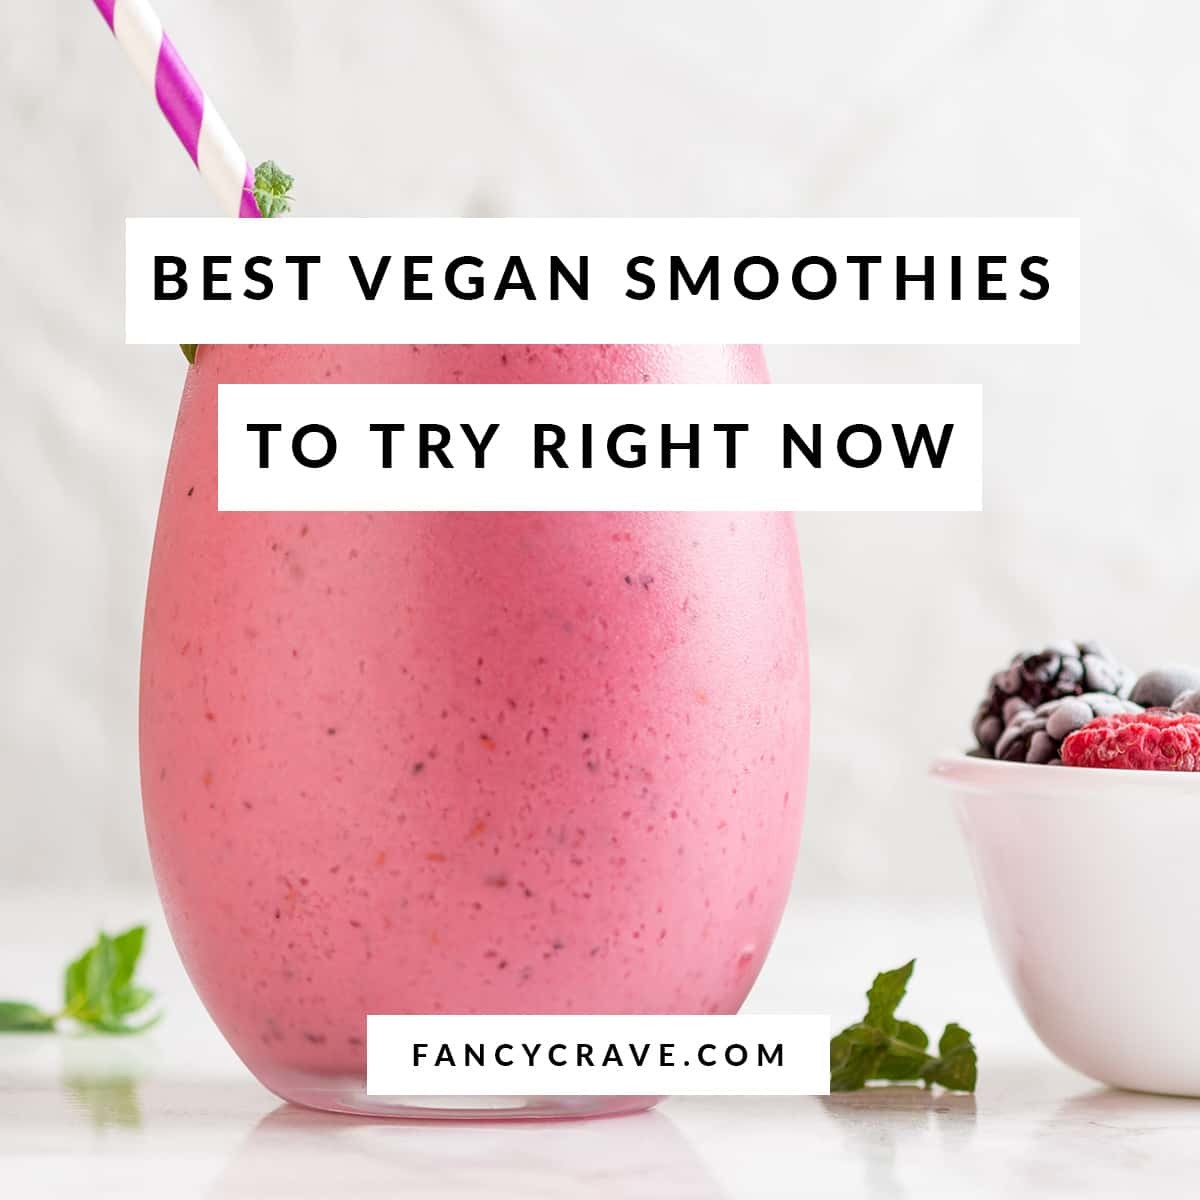 Best Vegan Smoothies to Try Right Now